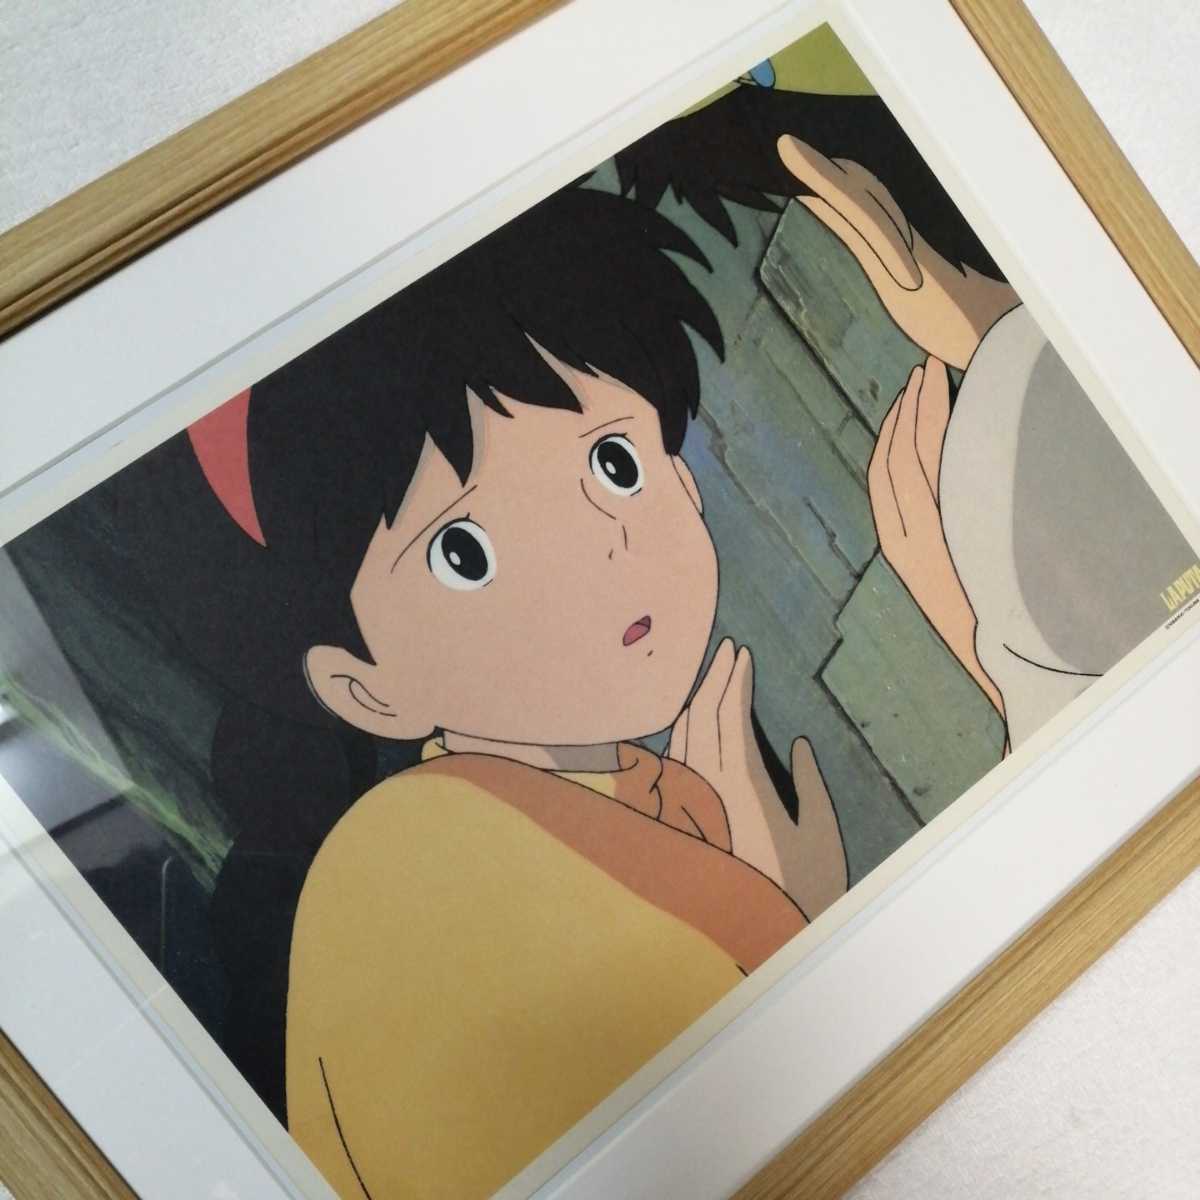 30 year and more front [ that time thing ] Studio Ghibli heaven empty. castle Laputa [ frame goods ] poster ornament picture . made original picture inspection ) cell picture postcard Miyazaki .